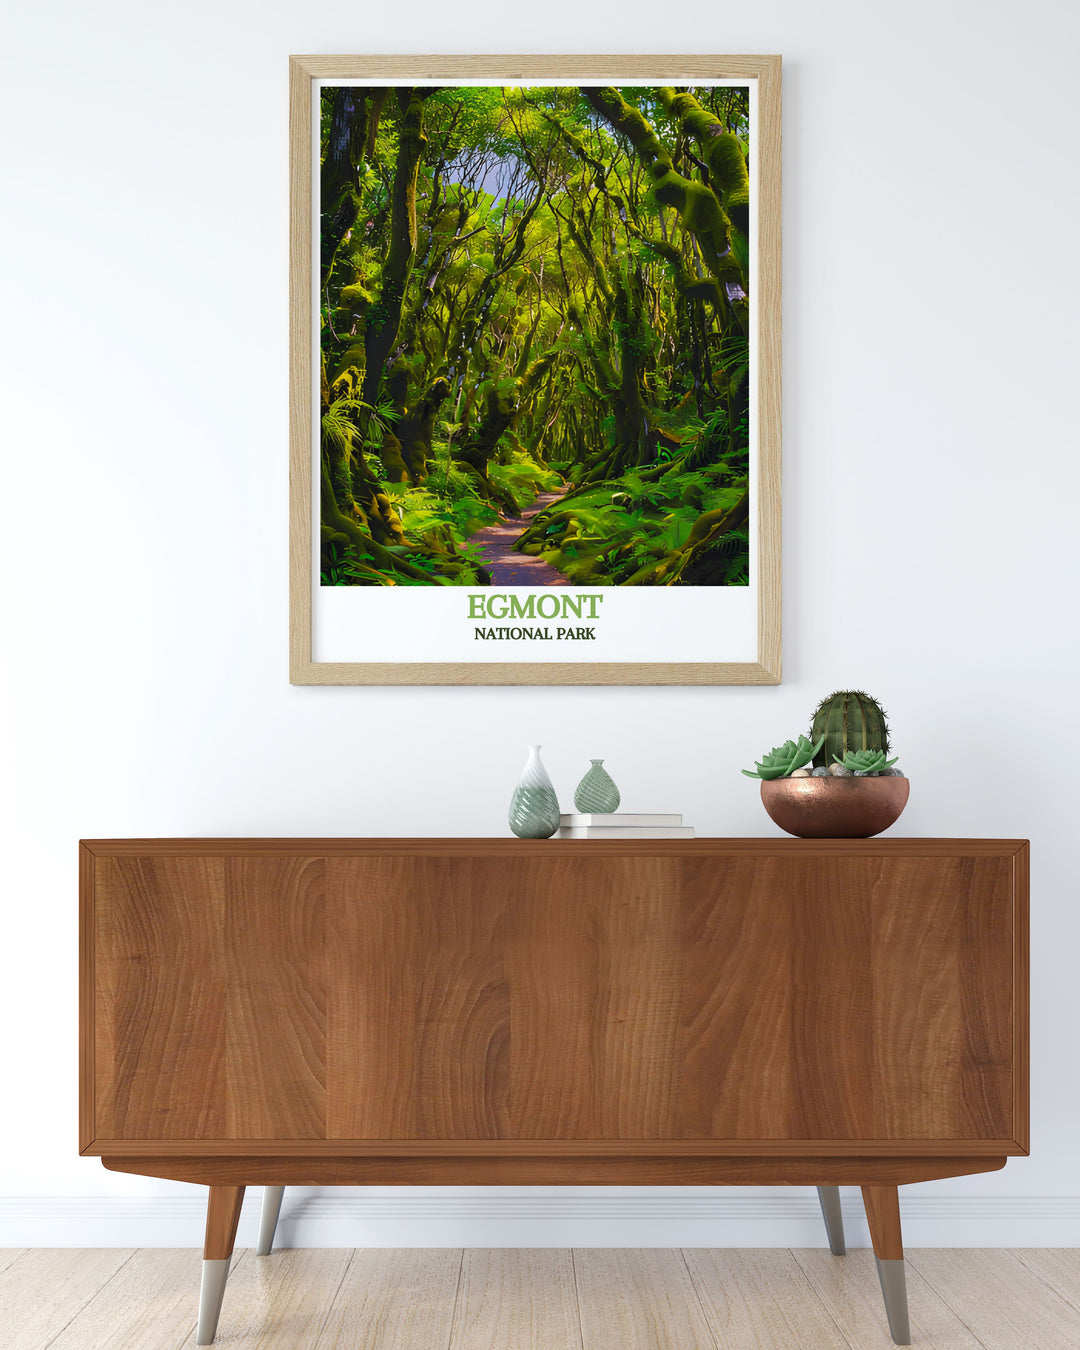 Framed art of the Goblin Forest, illustrating the unique, moss covered trees and captivating environment of this magical forest in New Zealand.